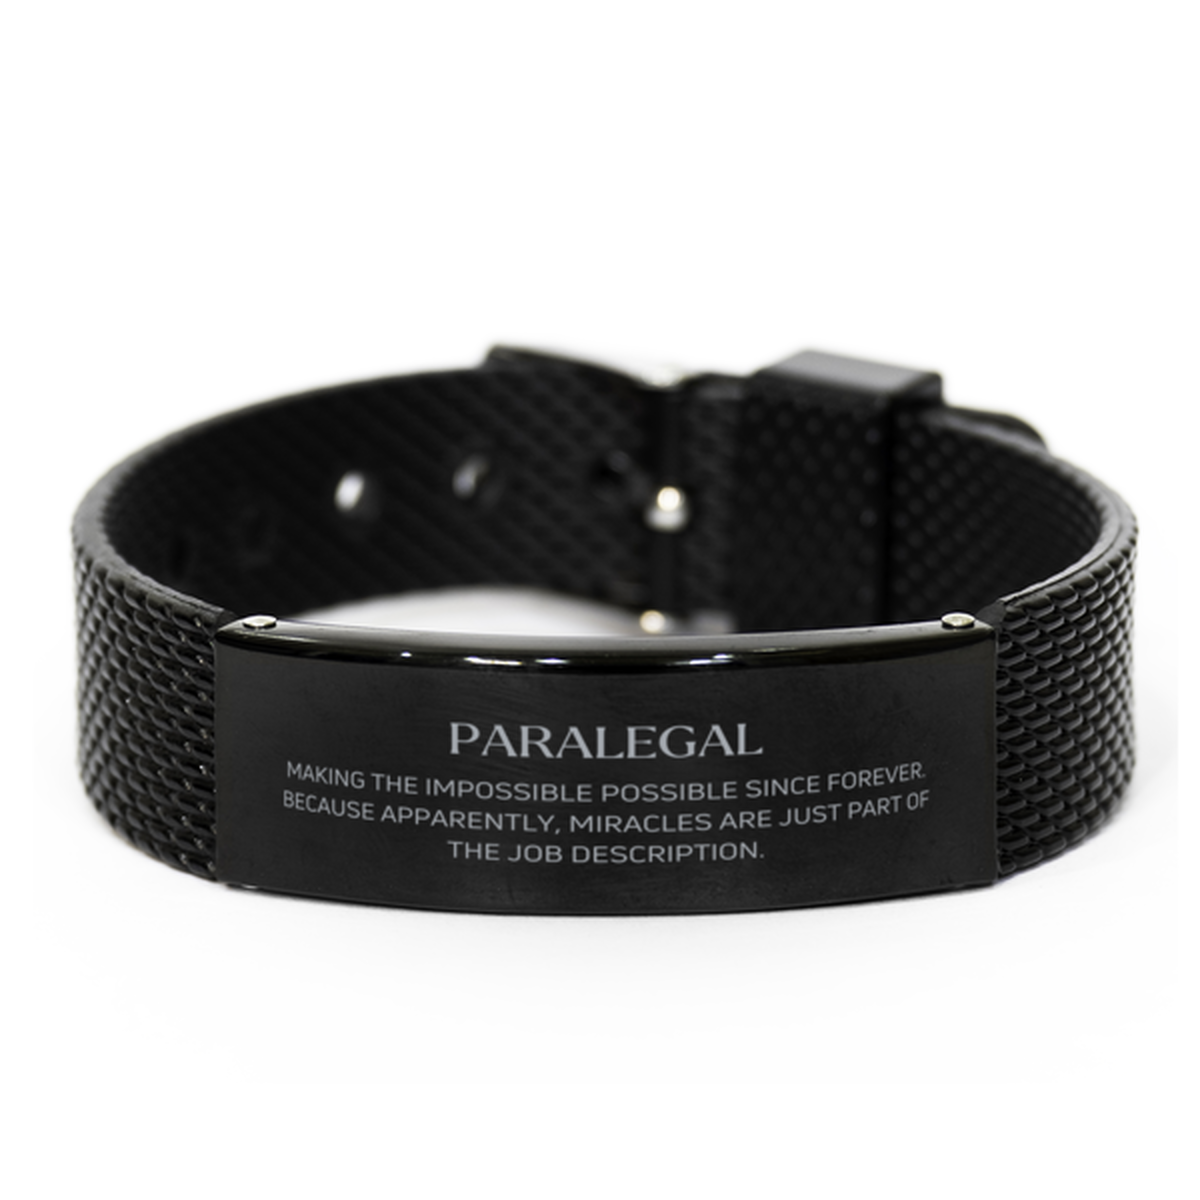 Funny Paralegal Gifts, Miracles are just part of the job description, Inspirational Birthday Black Shark Mesh Bracelet For Paralegal, Men, Women, Coworkers, Friends, Boss